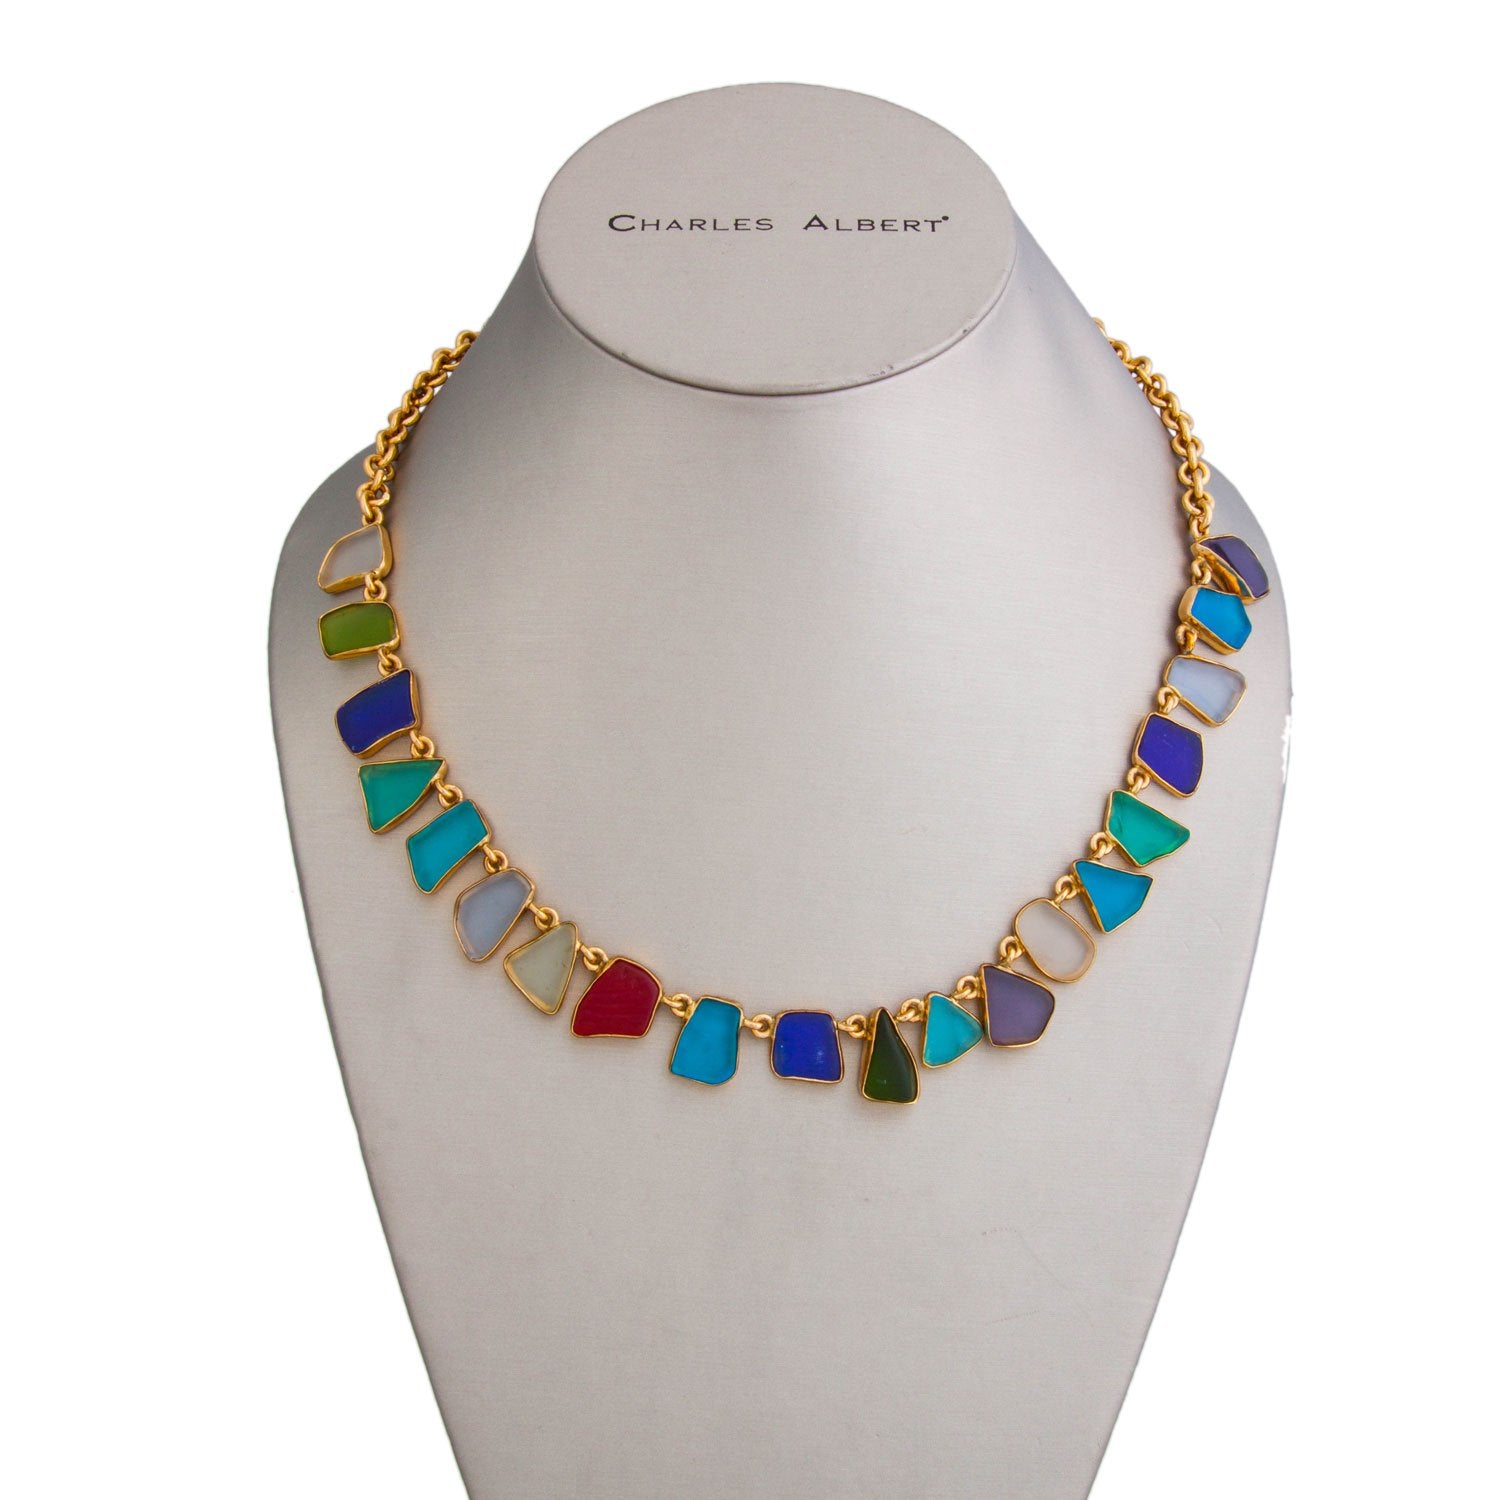 Alchemia Recycled Glass Necklace - Small | Charles Albert Jewelry